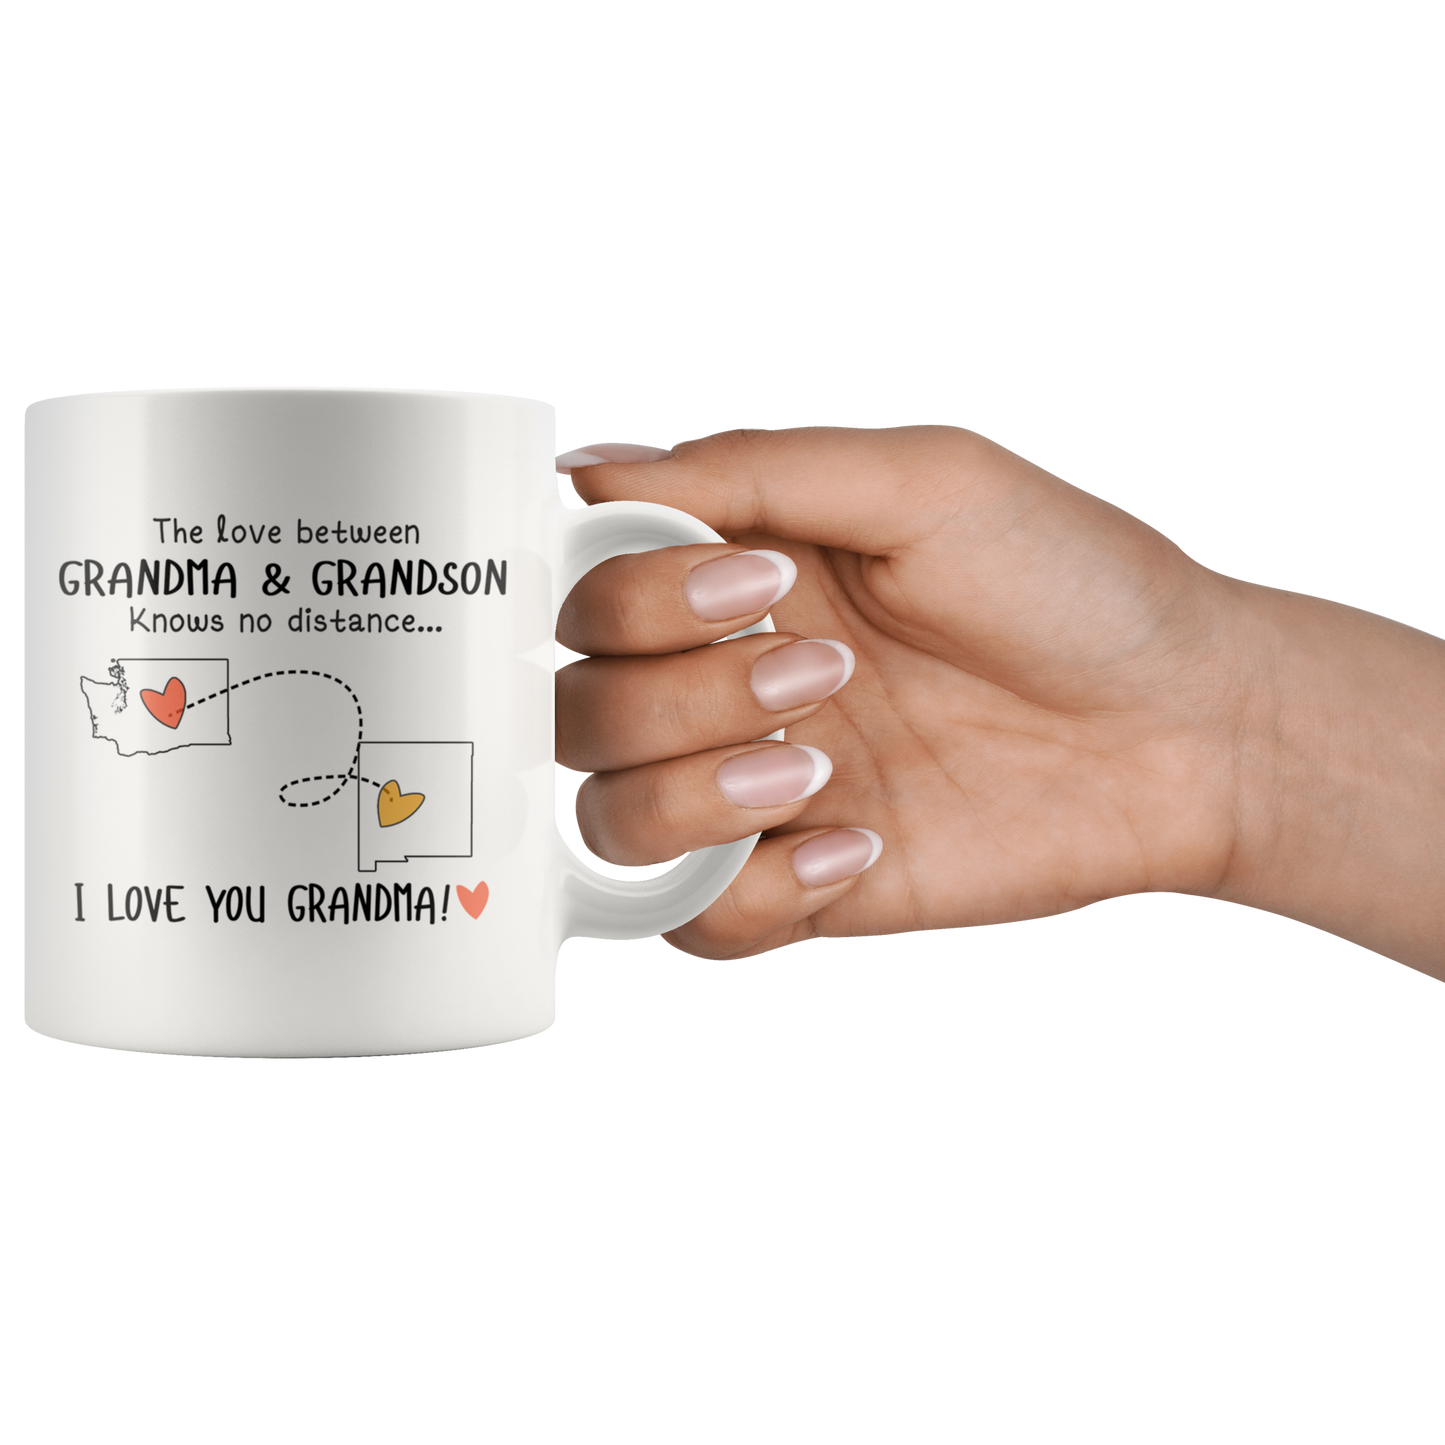 HNV-CUS-GRAND-sp-26887 - [ Washington | New Mexico ] (mug_11oz_white) Mothers Day Gifts Personalized Mother Day Gifts Coffee Mug F